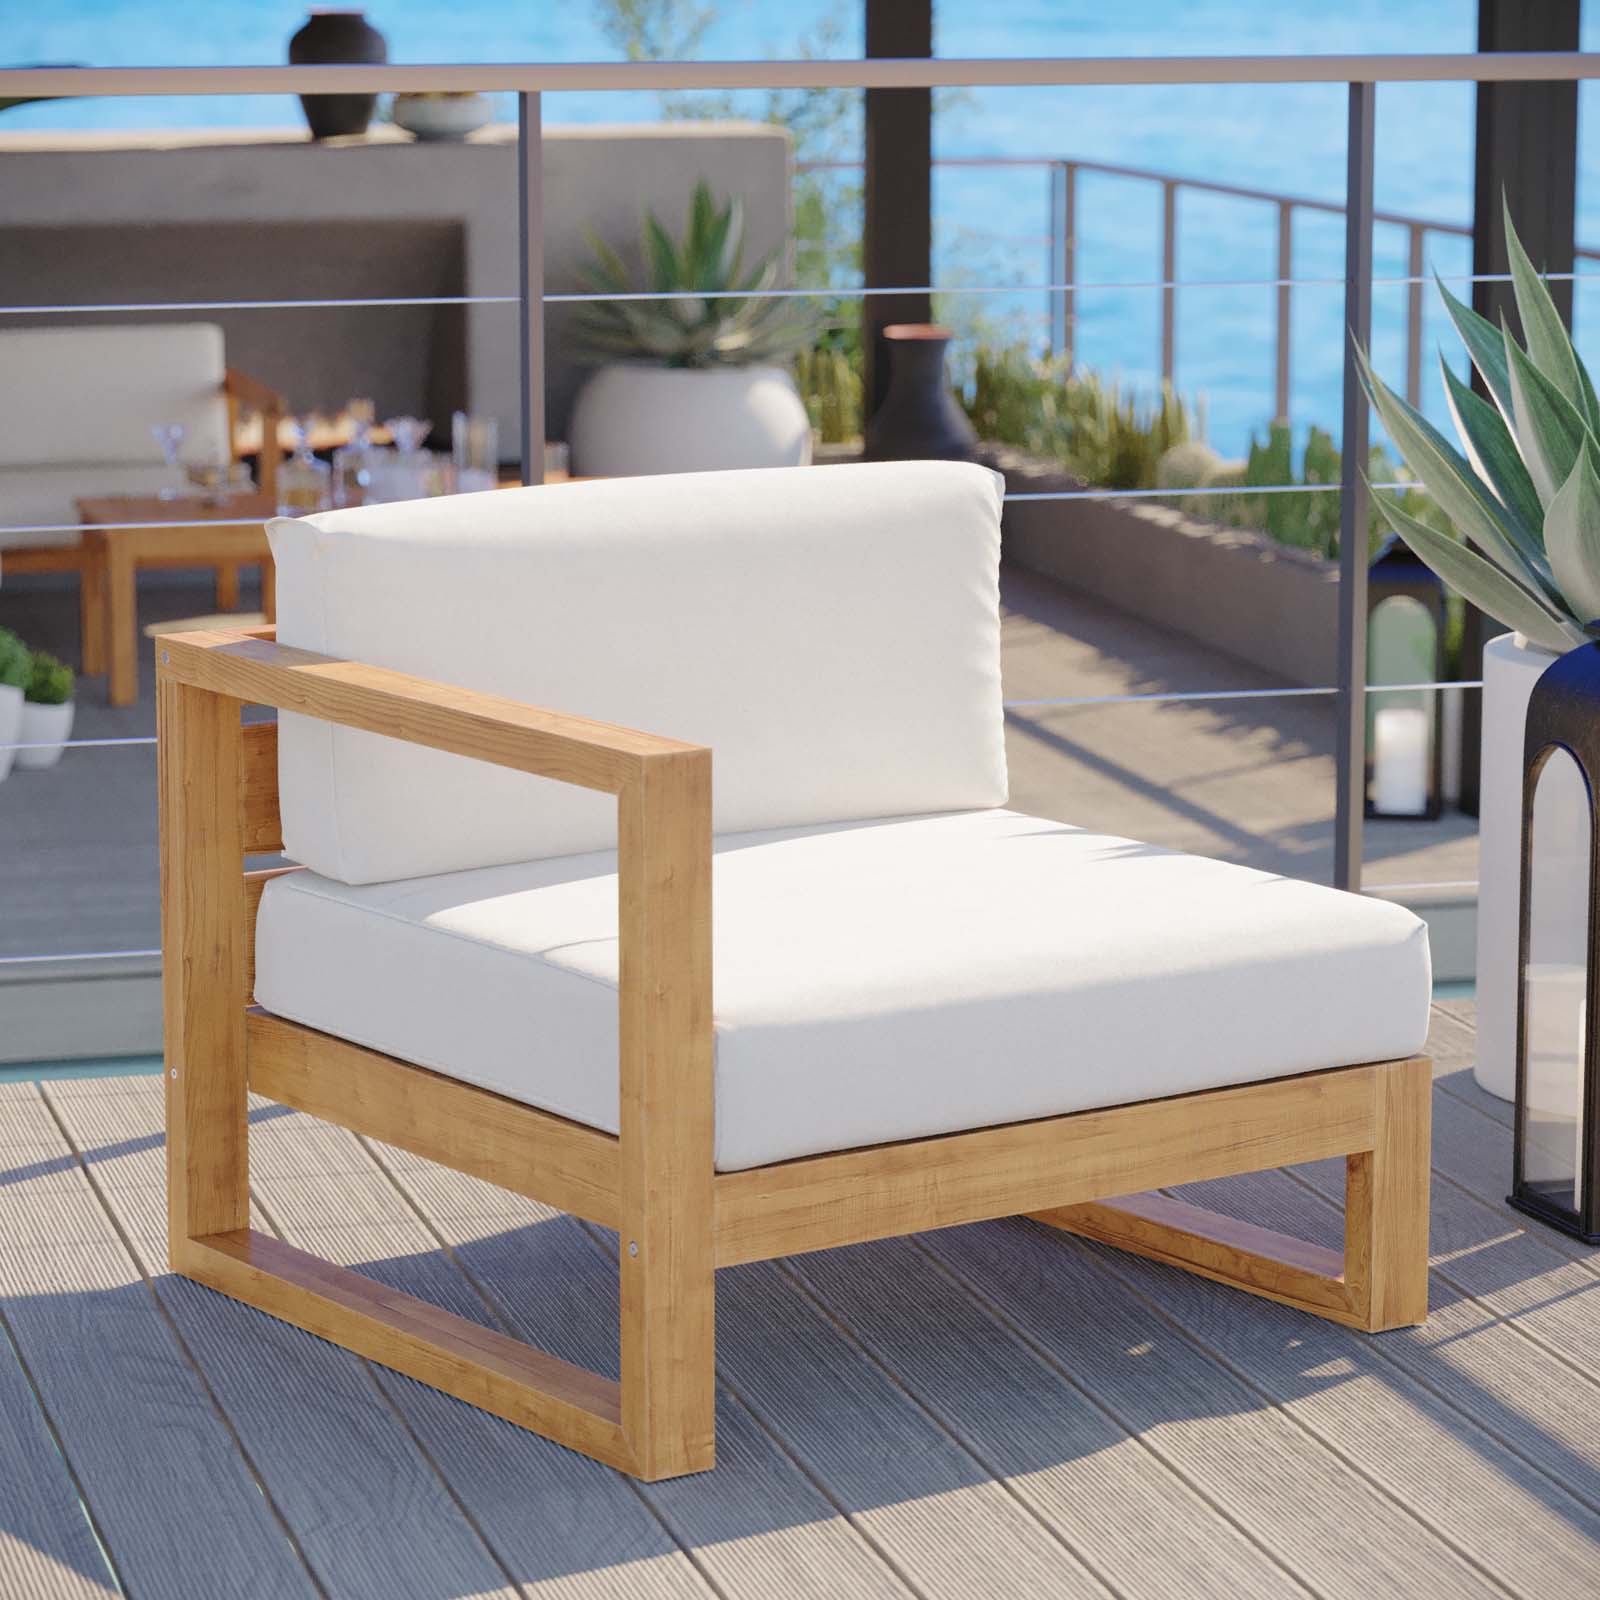 Upland Outdoor Patio Teak Wood Left-Arm Chair-Outdoor Arm Chair-Modway-Wall2Wall Furnishings